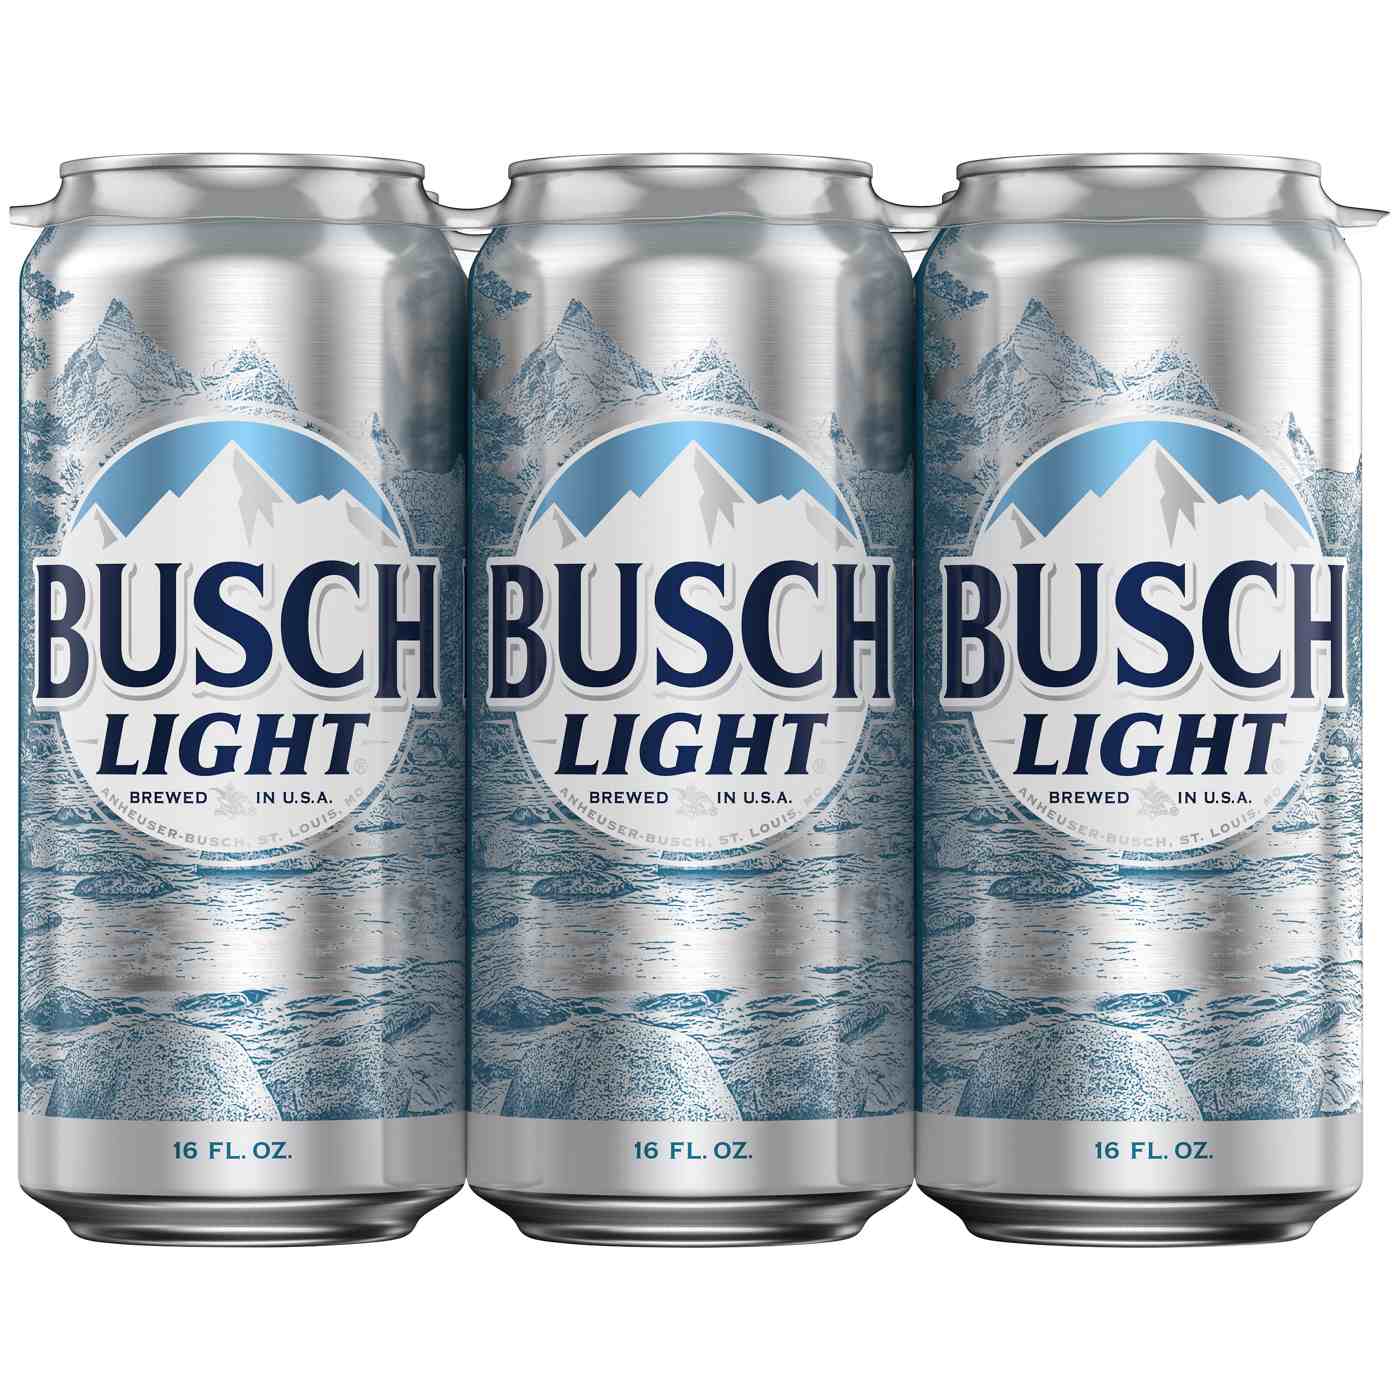 Busch Light Beer 6 pk Cans; image 4 of 4